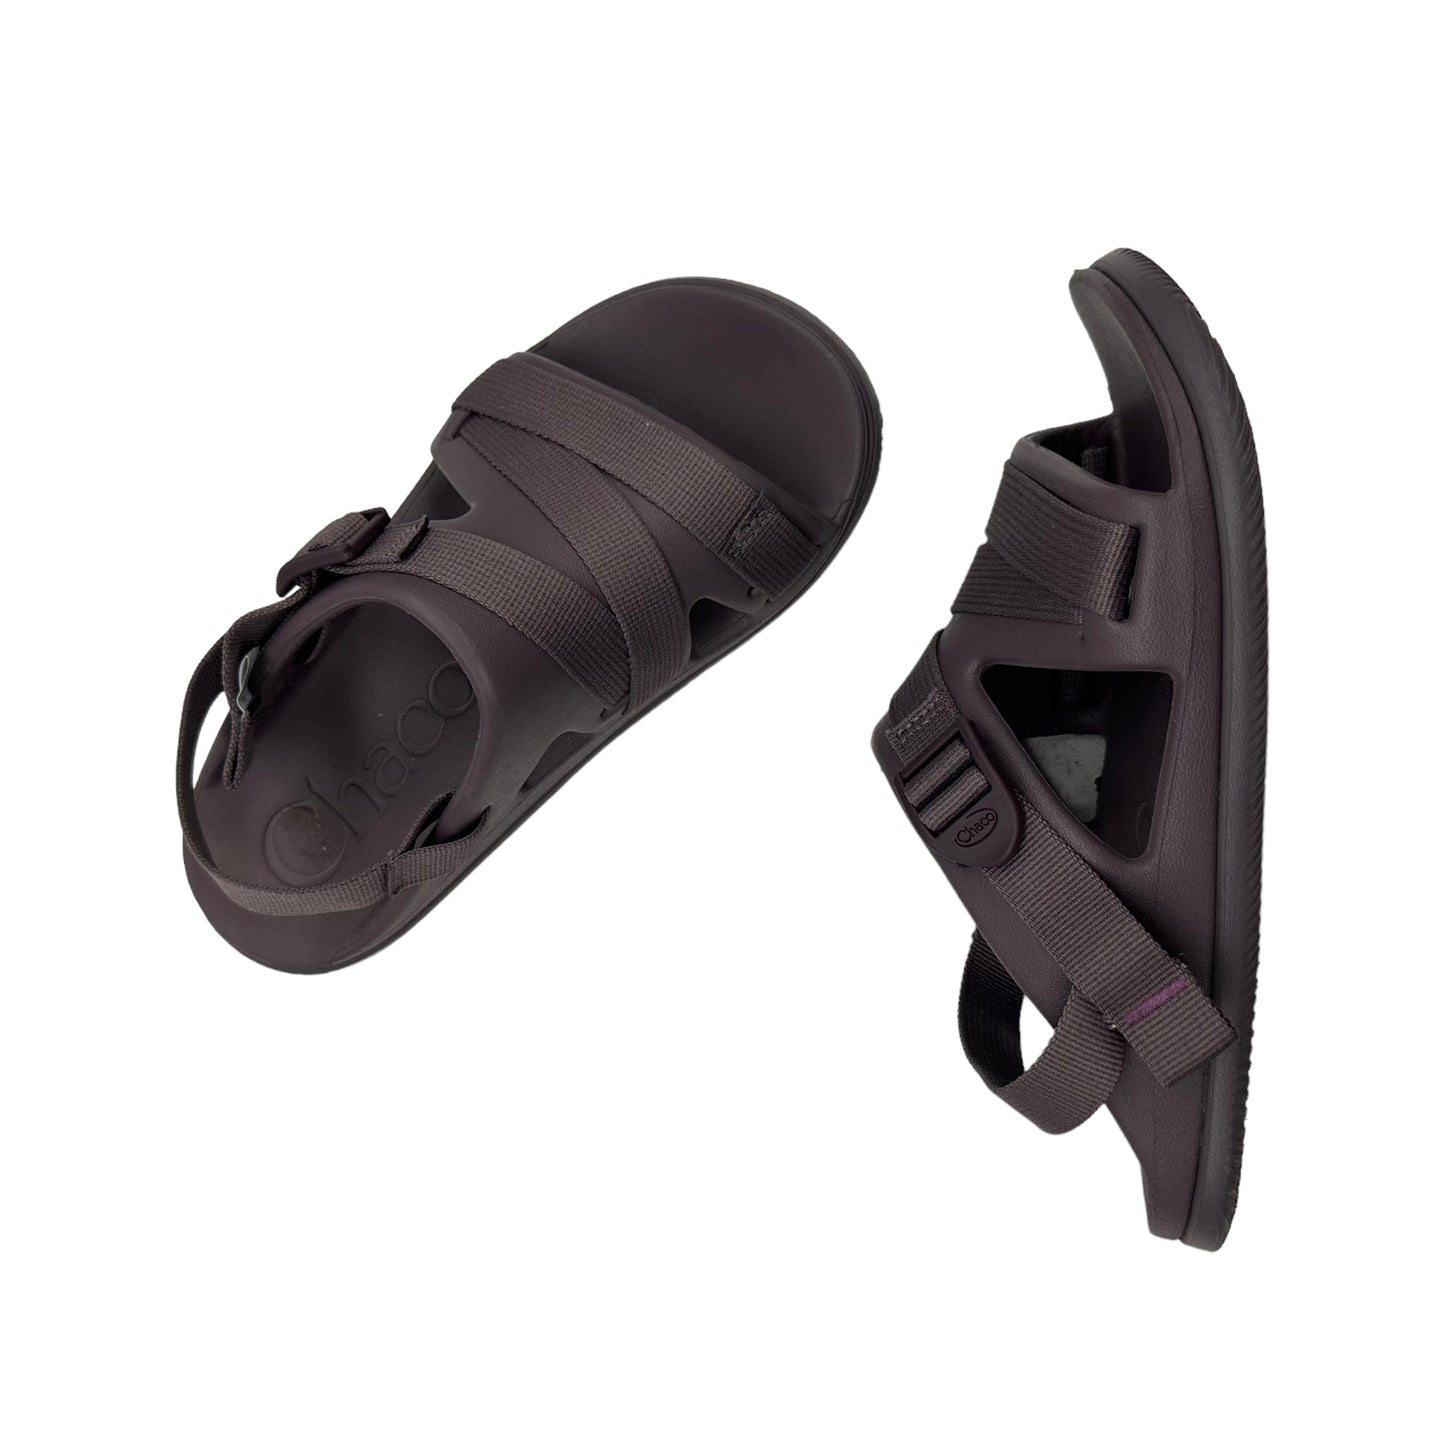 Sandals Sport By Chacos  Size: 7